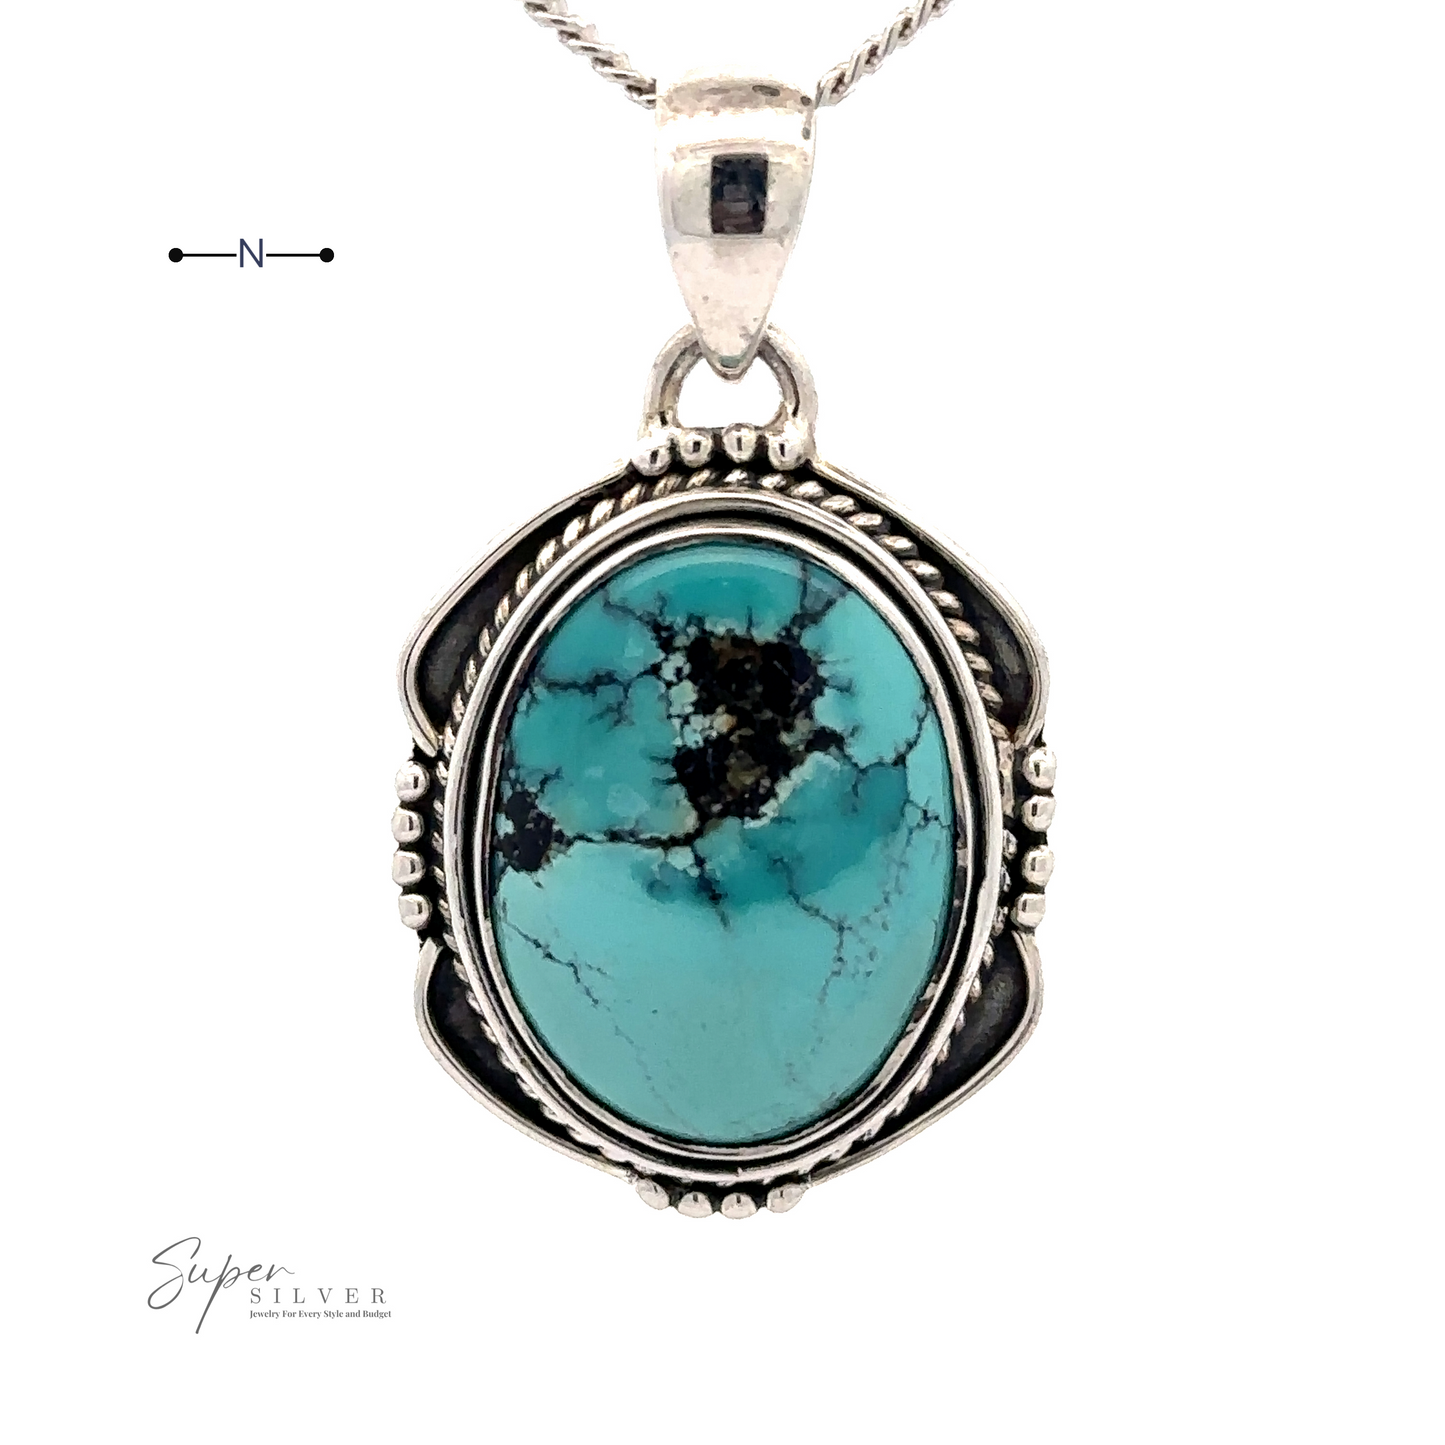 
                  
                    A Natural Turquoise Pendant with an Oval Shield Setting showcasing a large oval turquoise stone with black veining, surrounded by intricate .925 Sterling Silver detailing. Small logo reads "Super Silver" in the corner, ensuring authenticity of this exquisite handmade item.
                  
                